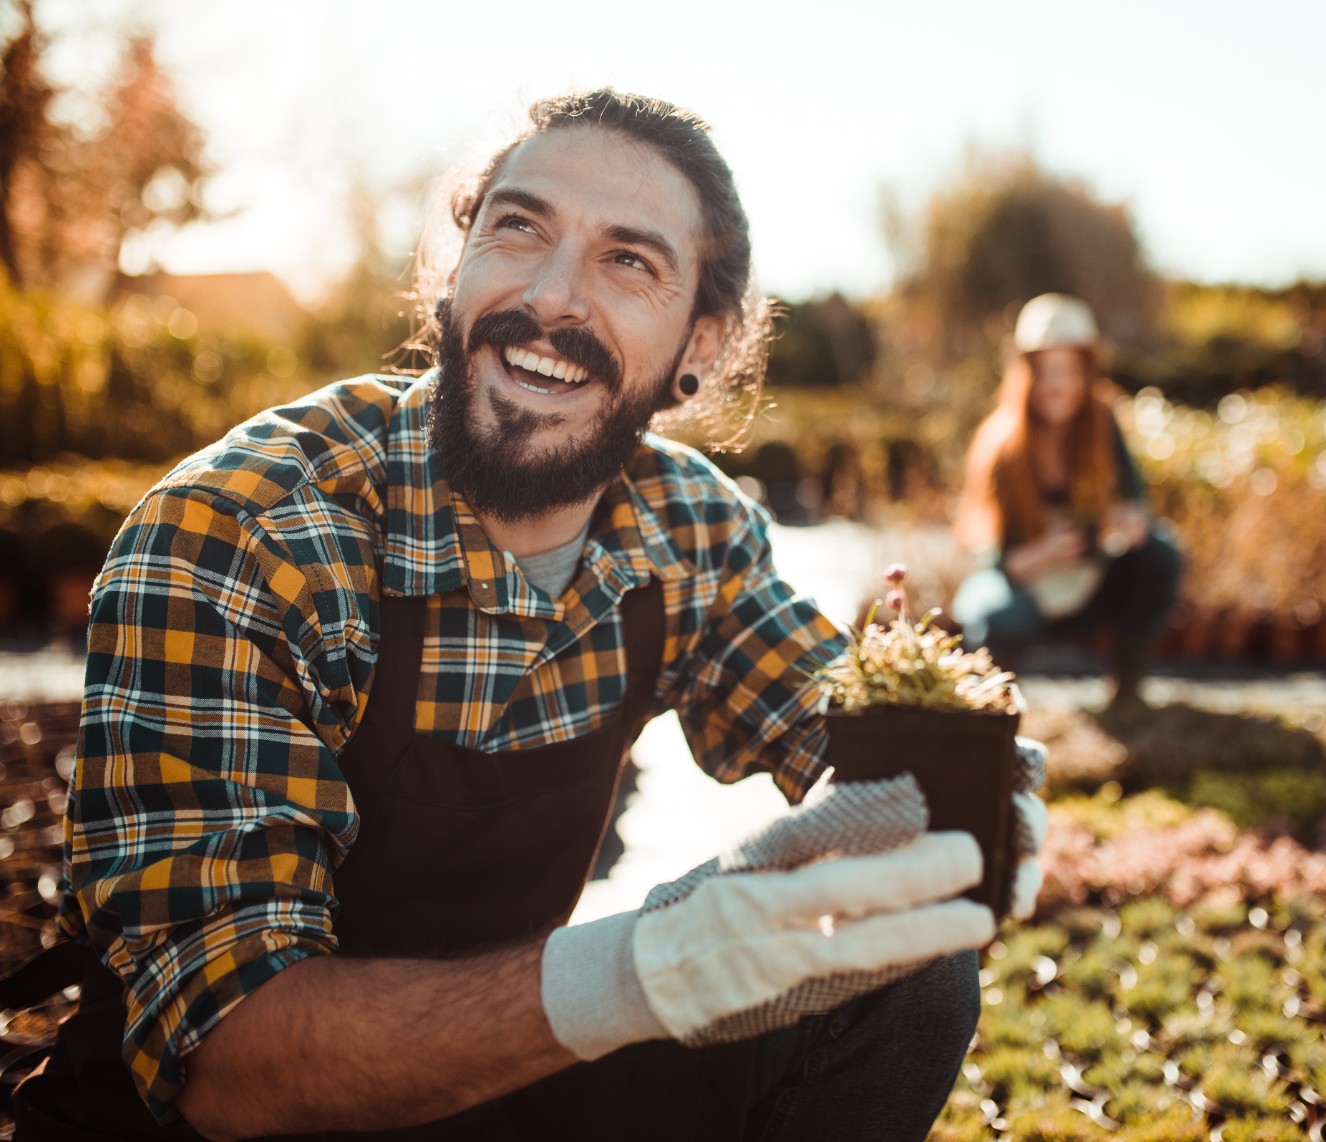 A young man with a beard is working in a nursery. He is crouching and holding a seedling while smiling.